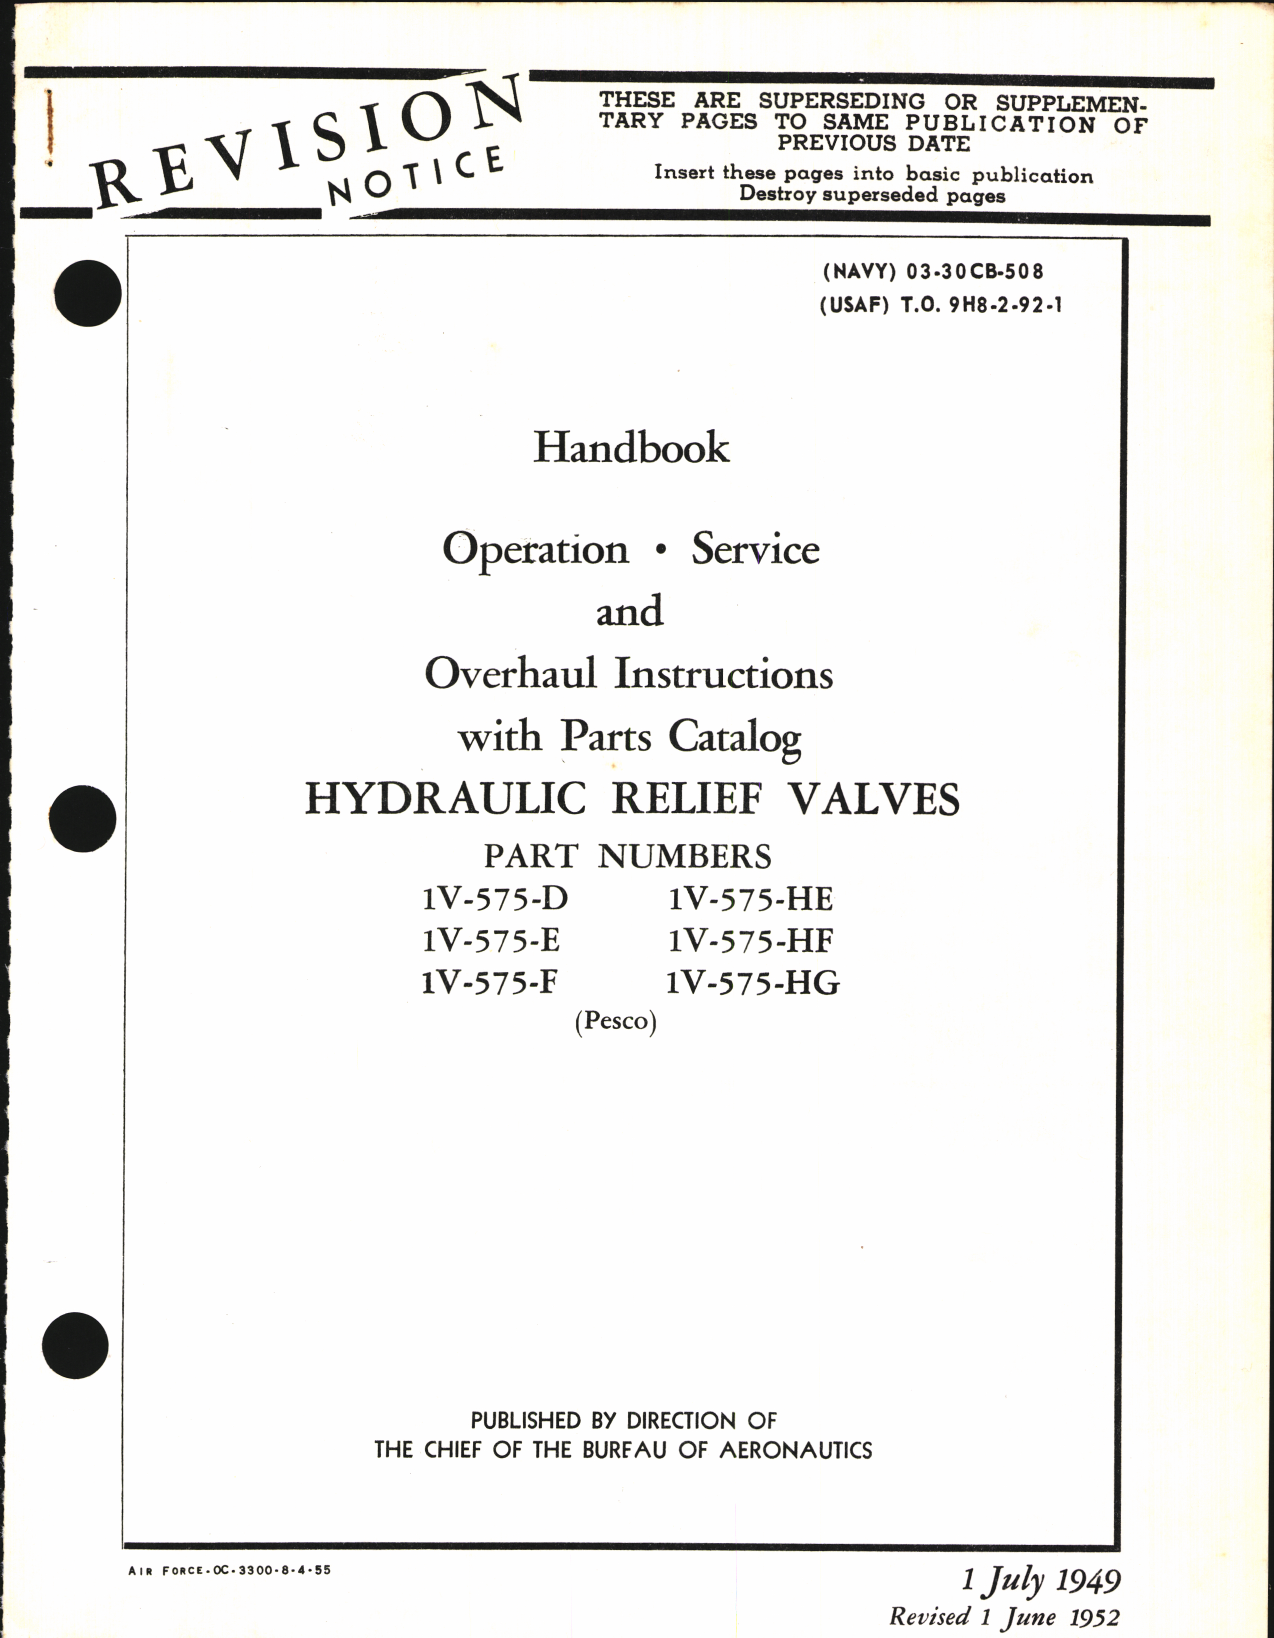 Sample page 1 from AirCorps Library document: Operation, Service and Overhaul Instructions with Parts Catalog for Hydraulic Relief Valves